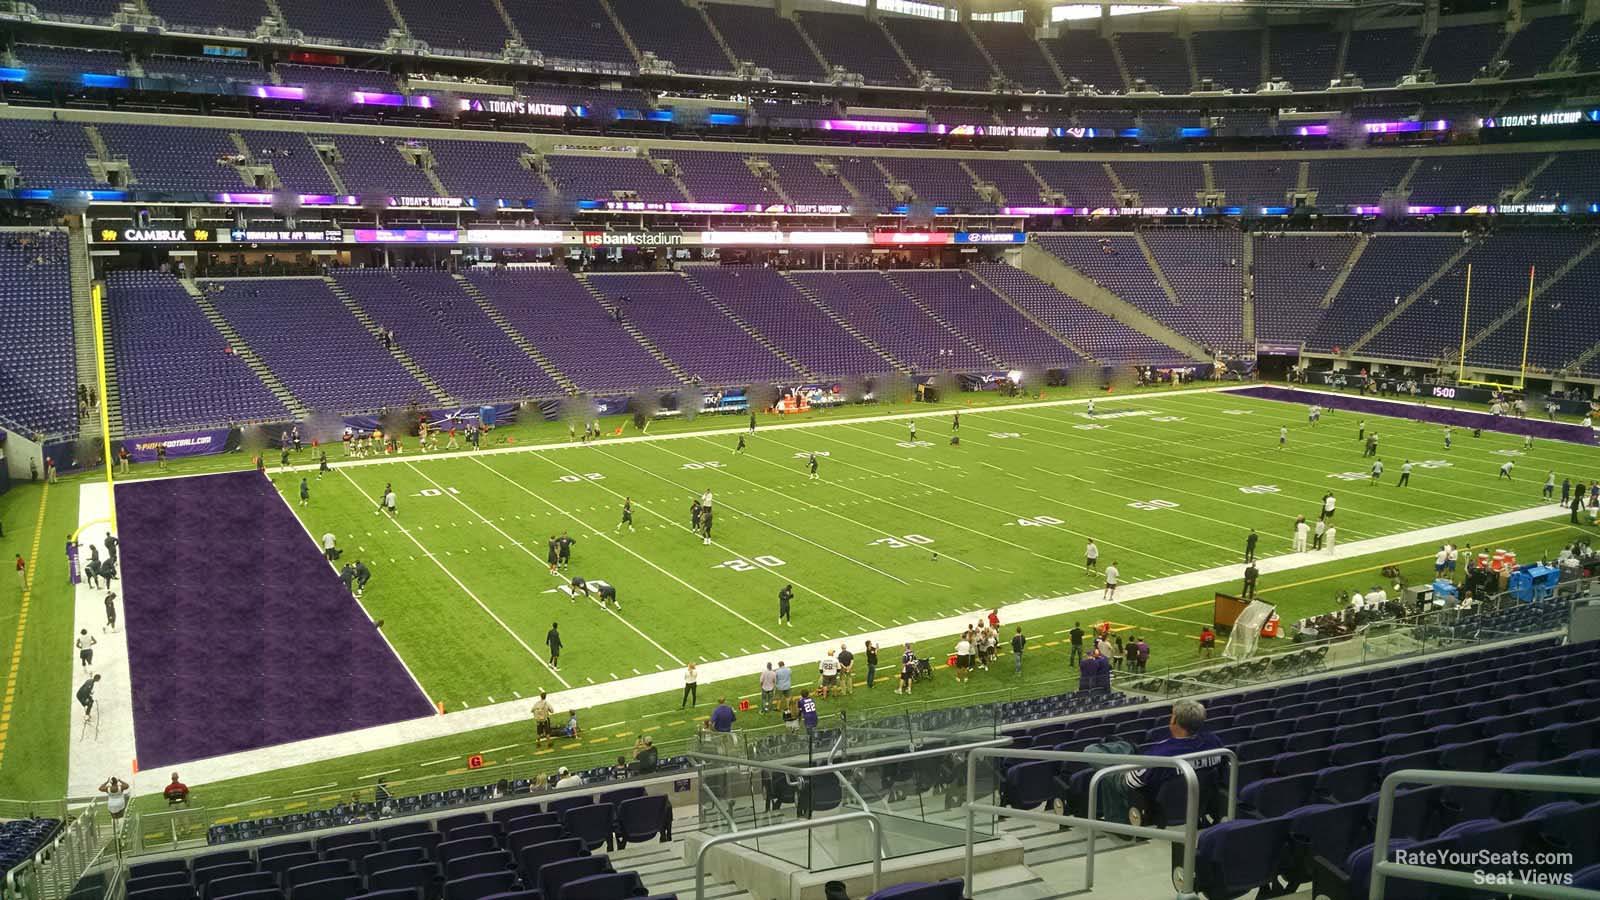 section 135, row 13 seat view  for football - u.s. bank stadium